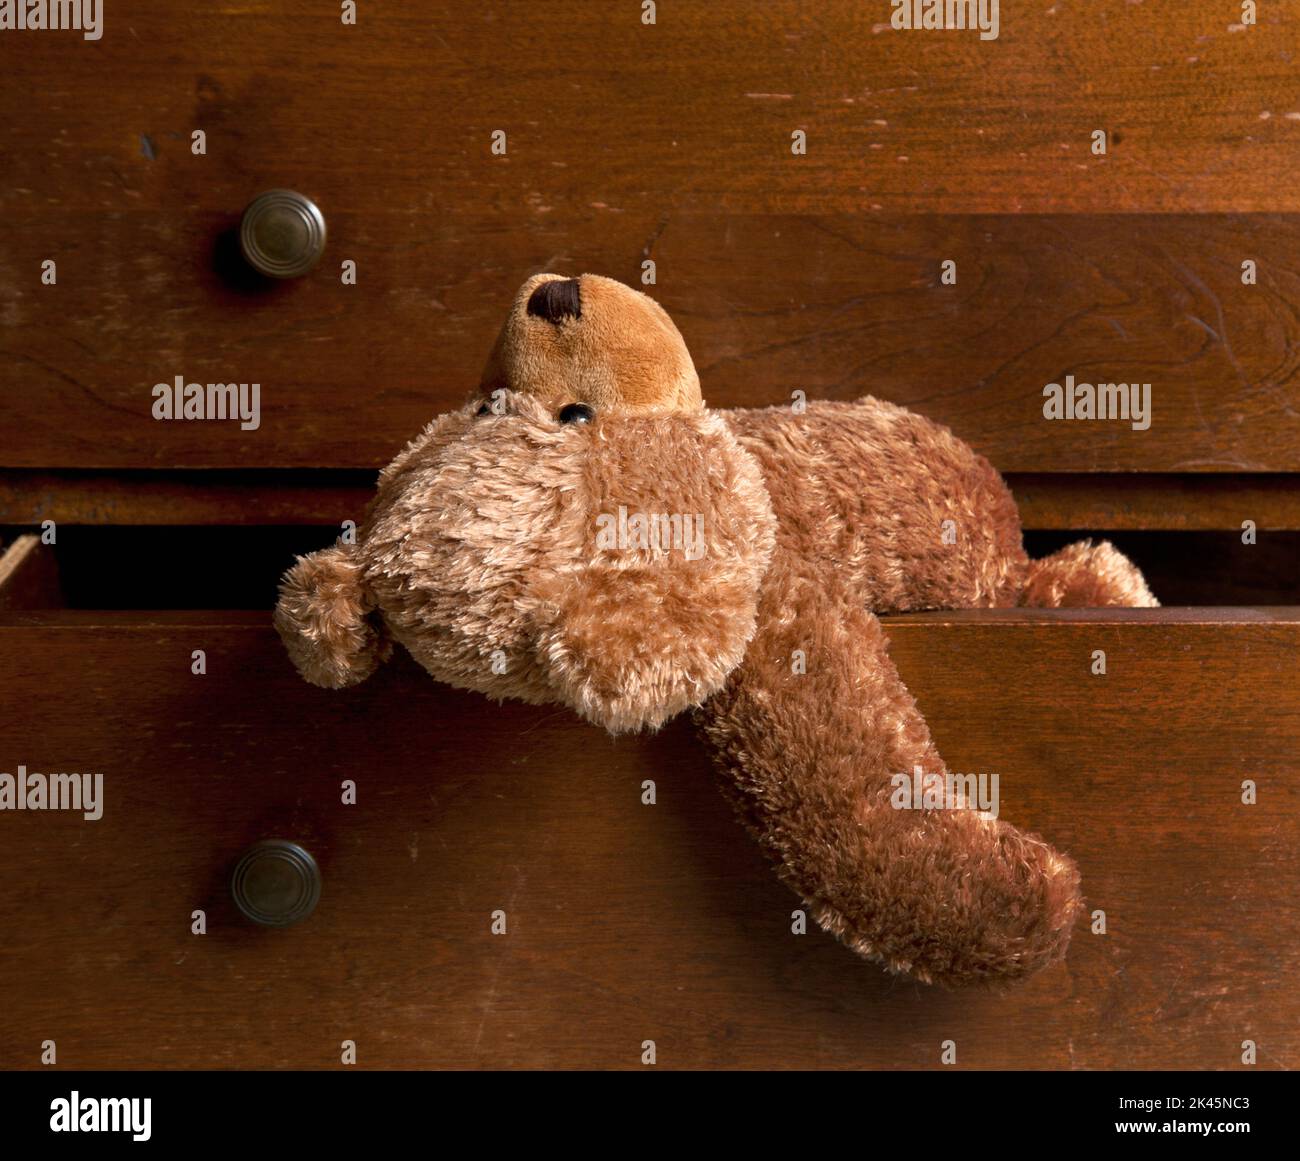 A children's brown soft toy teddy bear hanging out of a drawer. Stock Photo